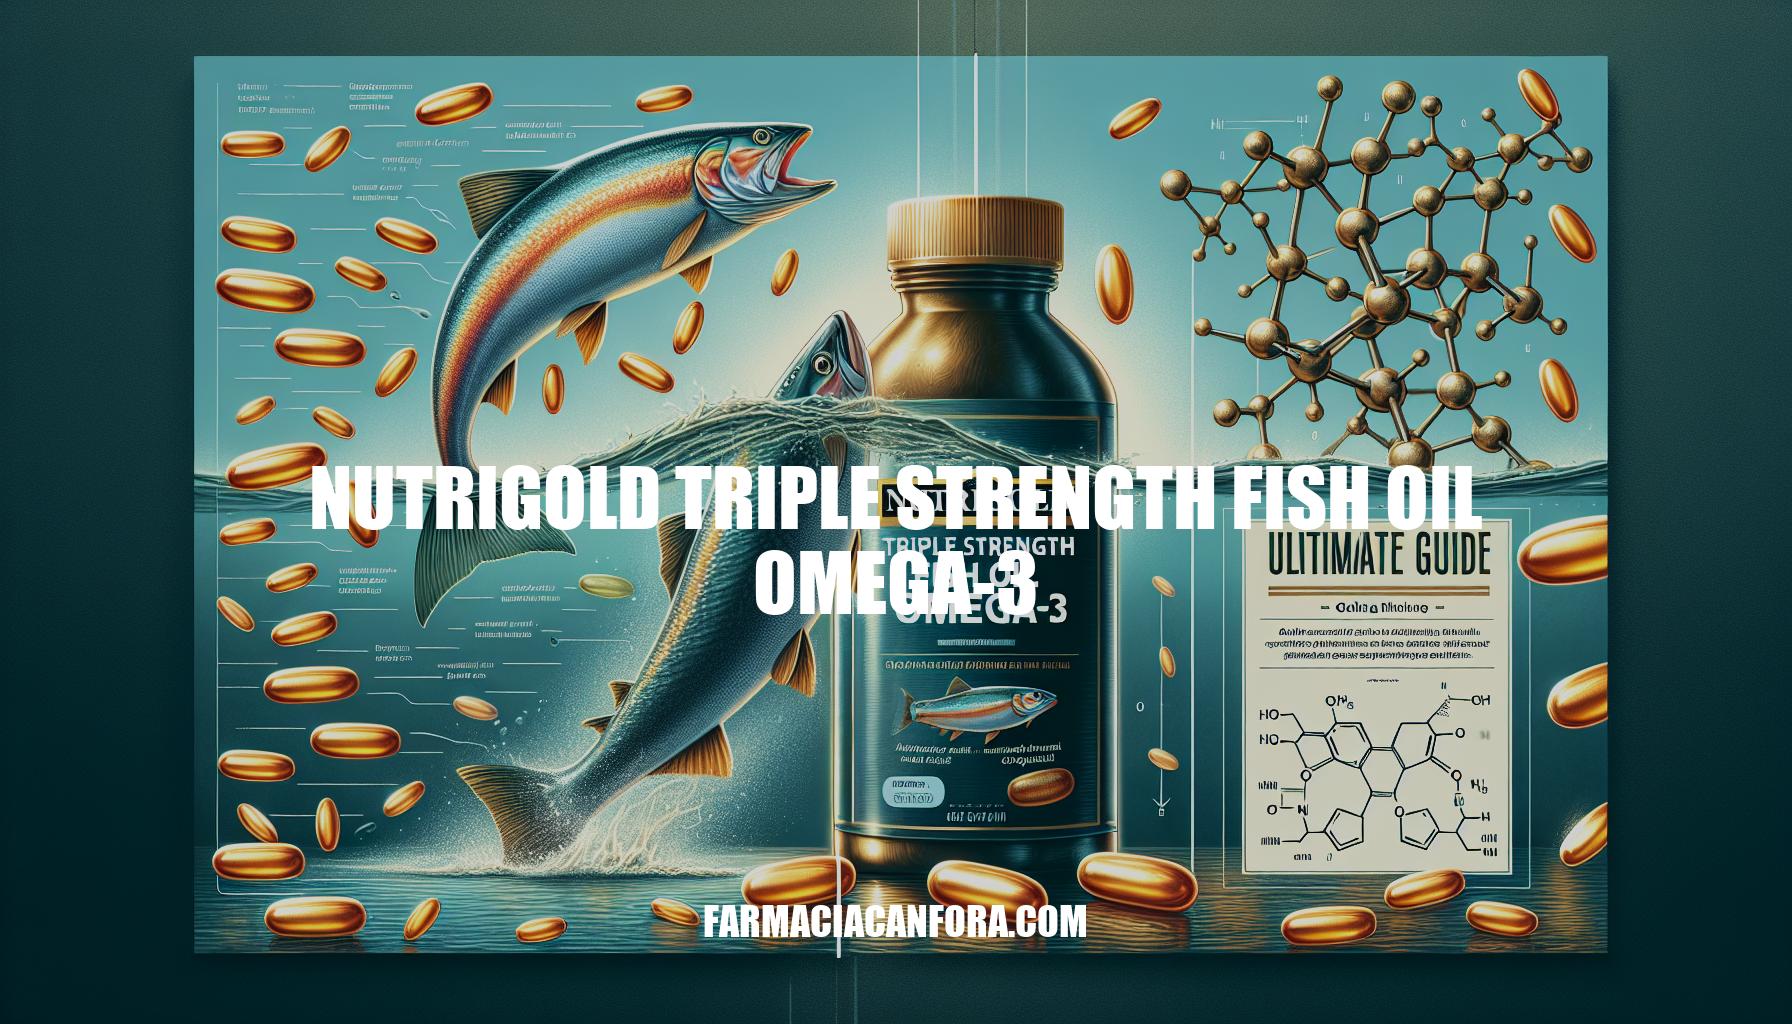 Nutrigold Triple Strength Fish Oil Omega-3: The Ultimate Guide